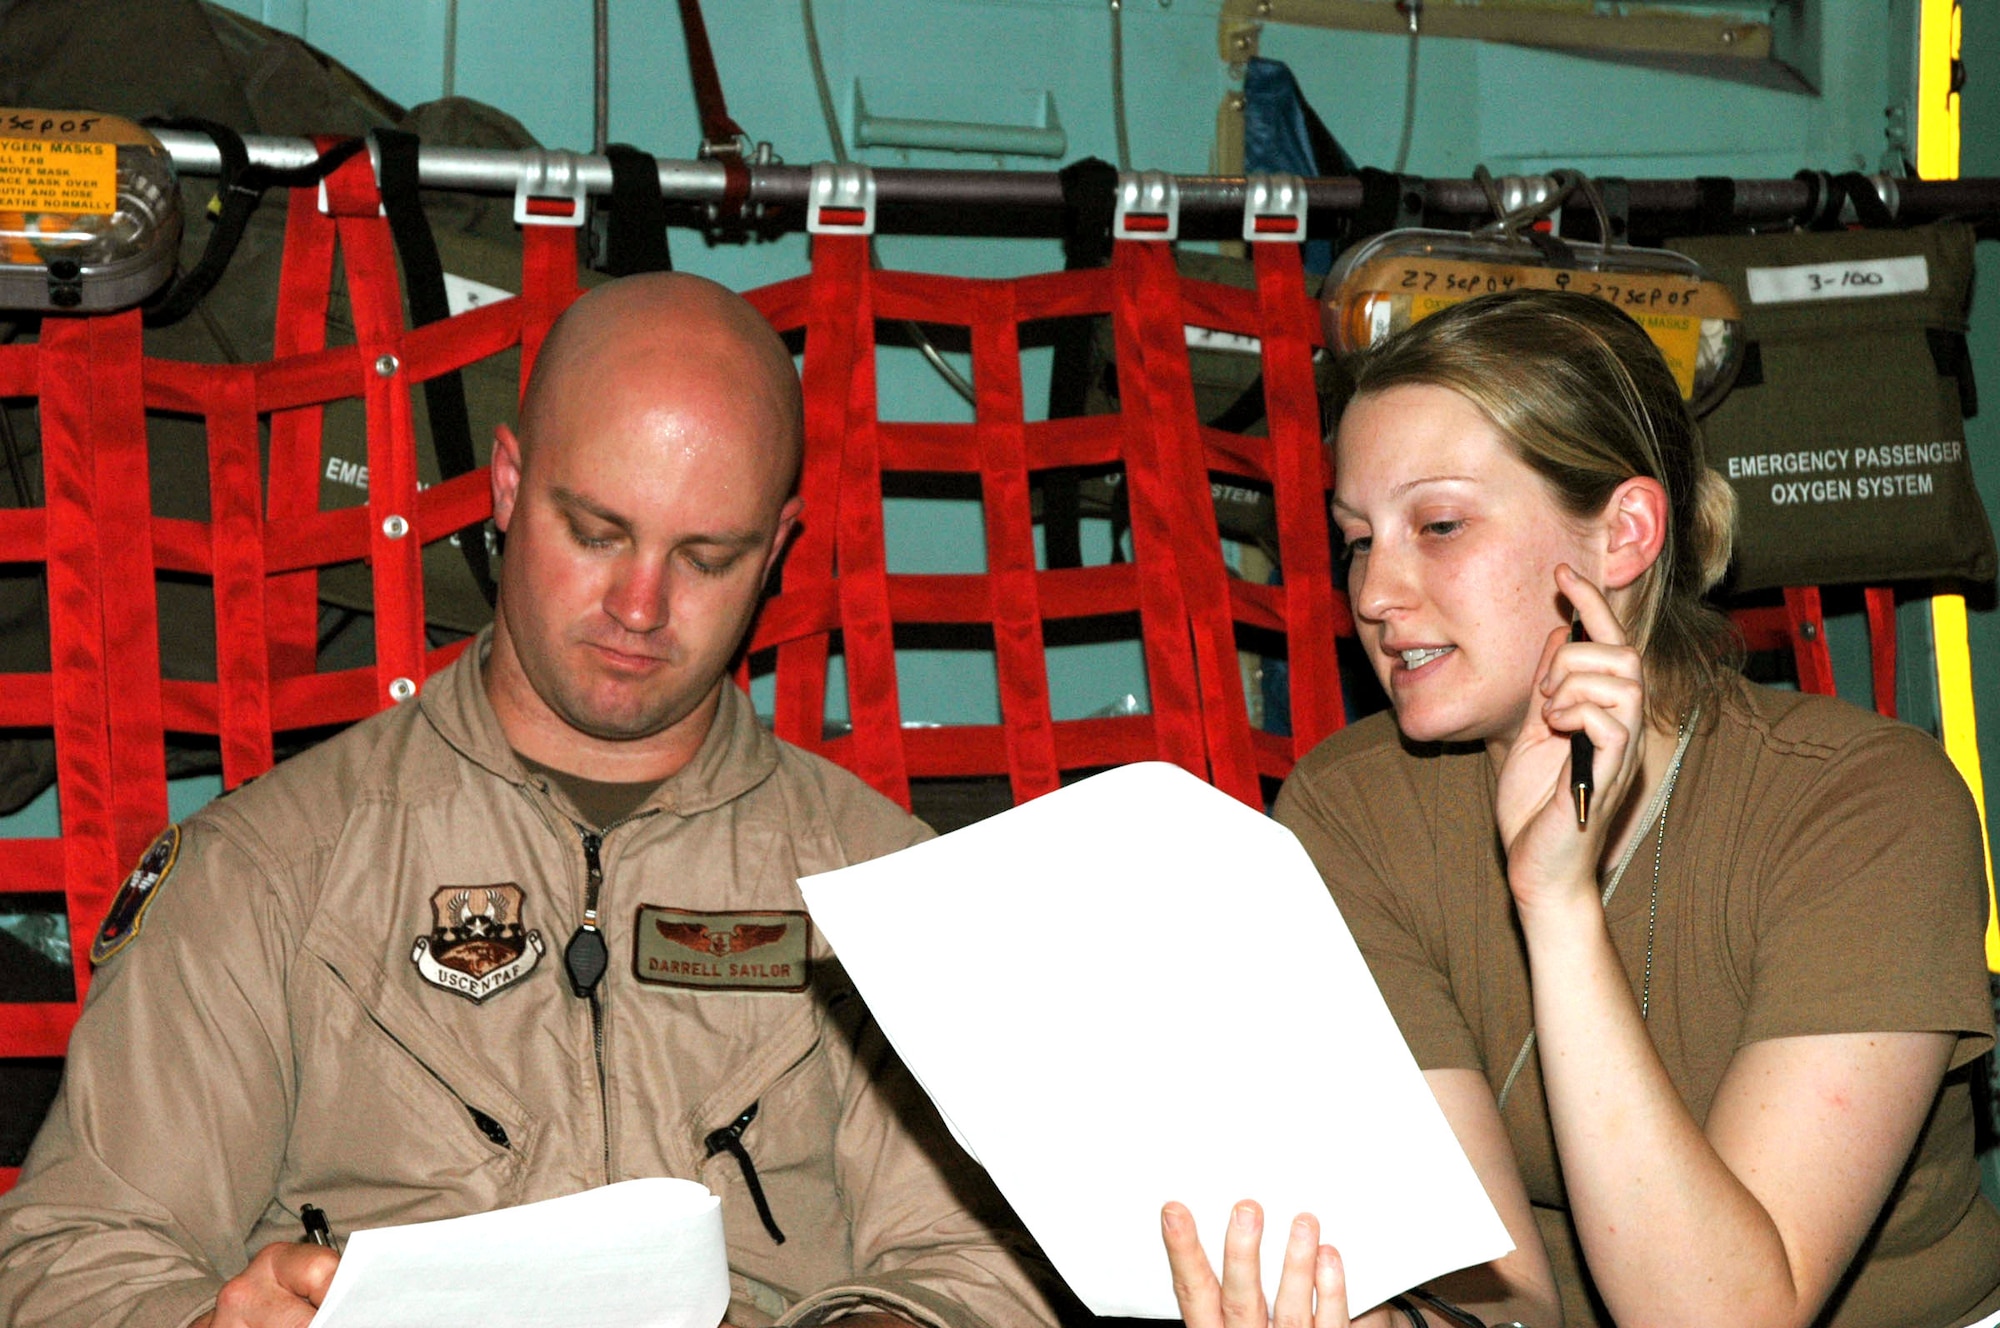 BALAD AIR BASE, Iraq -- Second Lt. Shandry Goshert briefs Capt. Darrell Saylor on the patients who will be medevaced to Germany.  She relays all pertinent medical information regarding the patients' conditions including treatment received, medication administered and special needs.  Lieutenant Goshert is a nurse with the 332nd Expeditionary Medical Group's contingency aeromedical staging facility and is deployed from Keesler Air Force Base, Miss.  (U.S. Air Force photo by Senior Airman Chawntain Sloan)